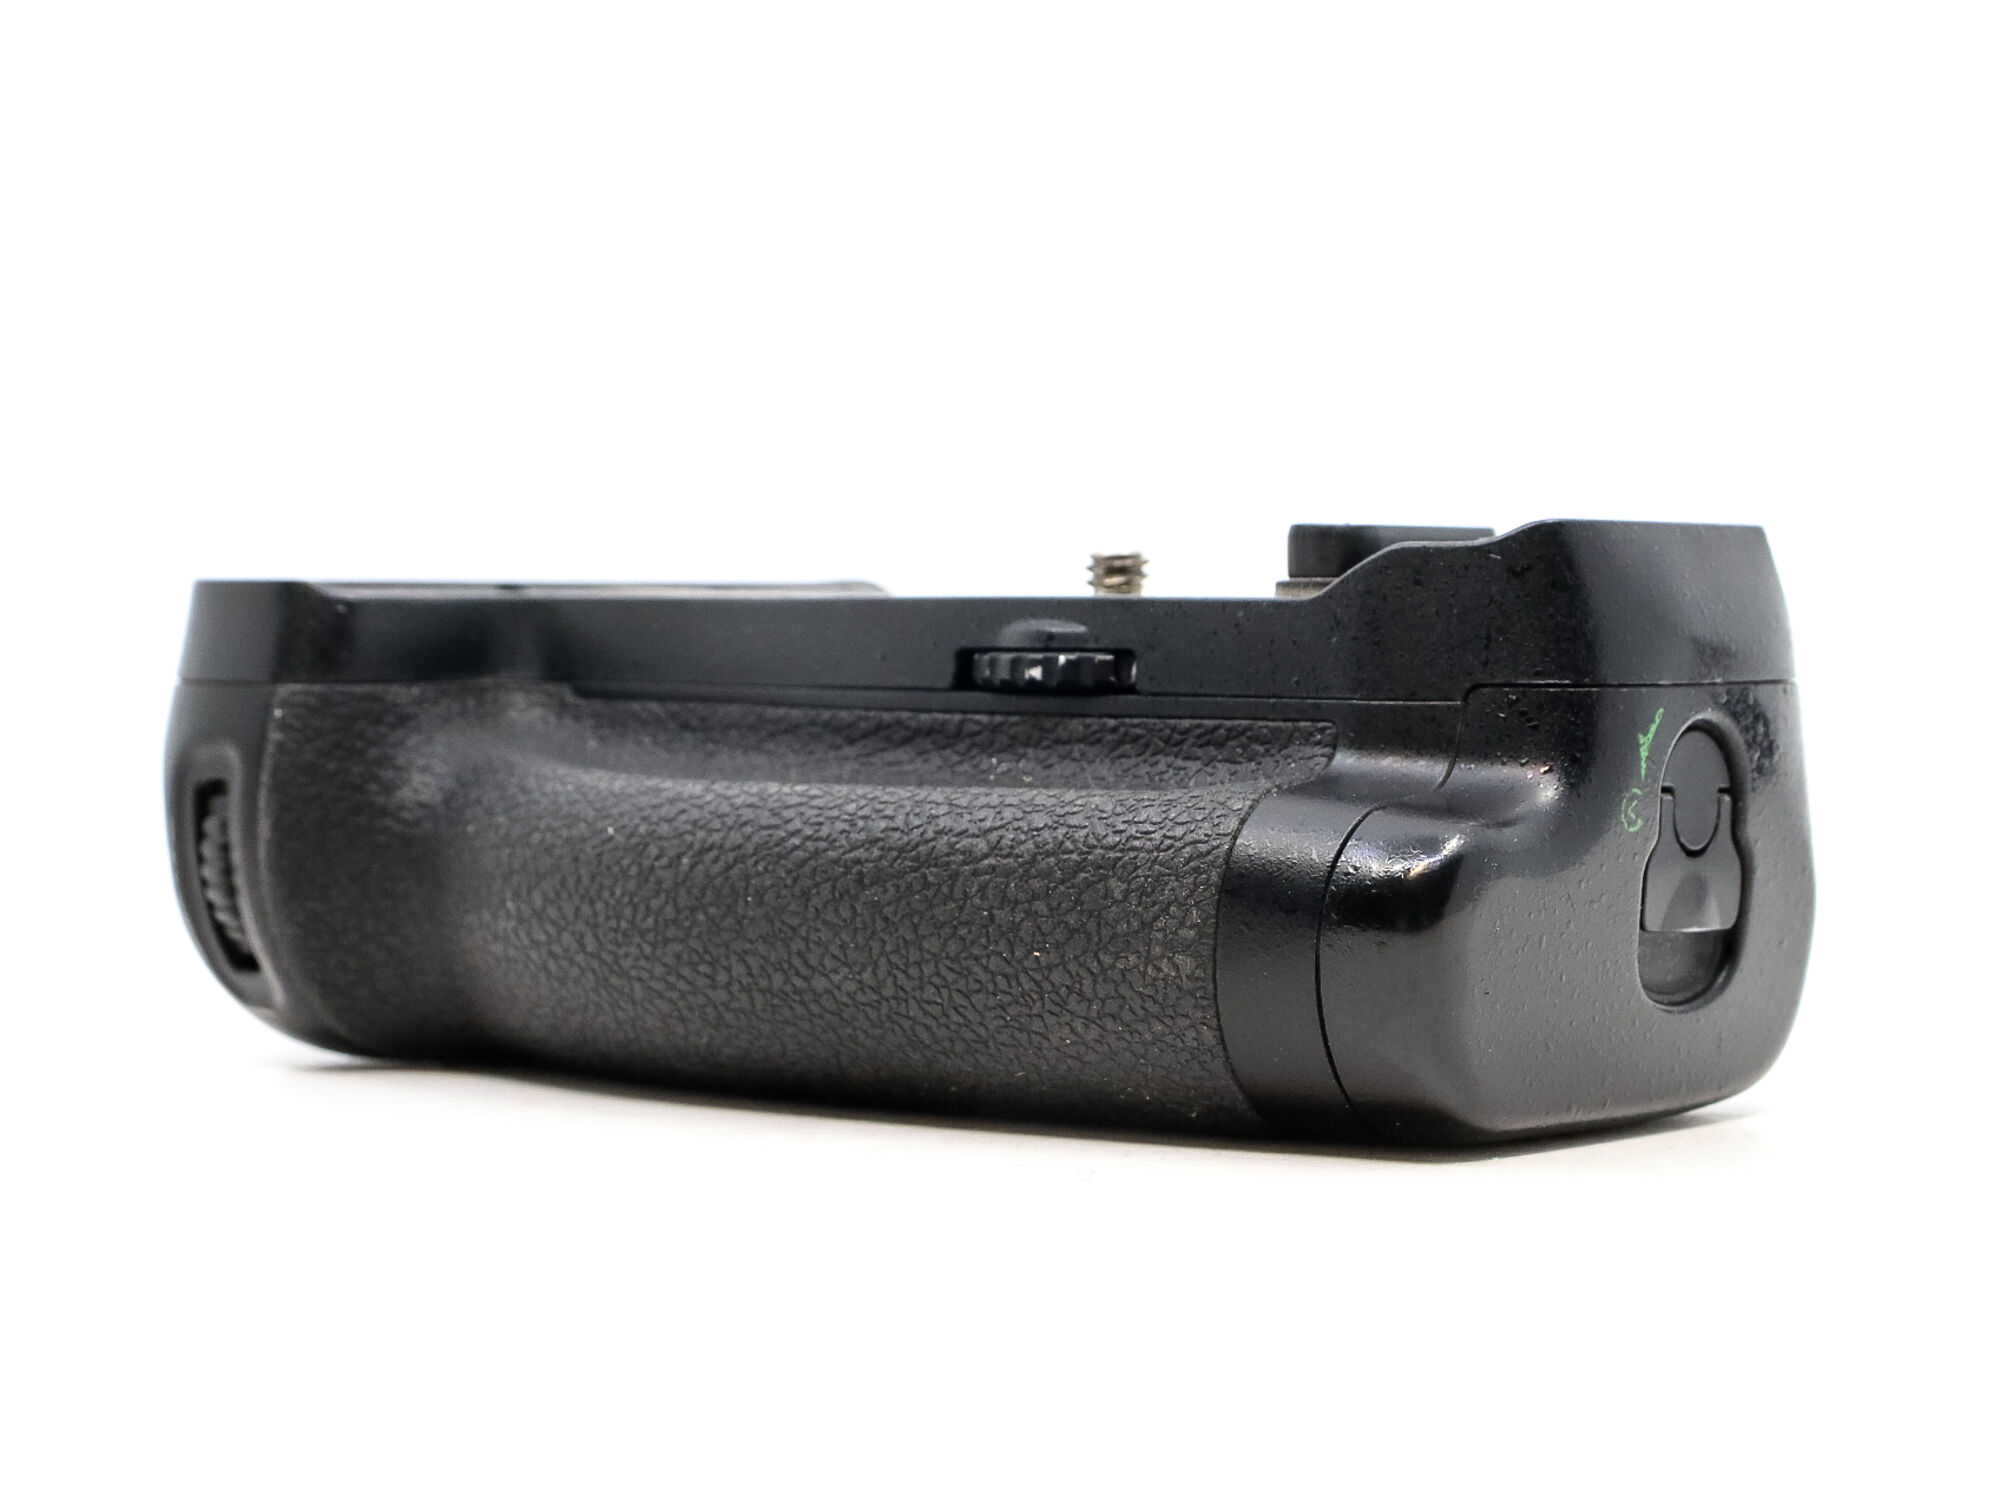 Nikon MB-D18 Battery Grip (Condition: Well Used)